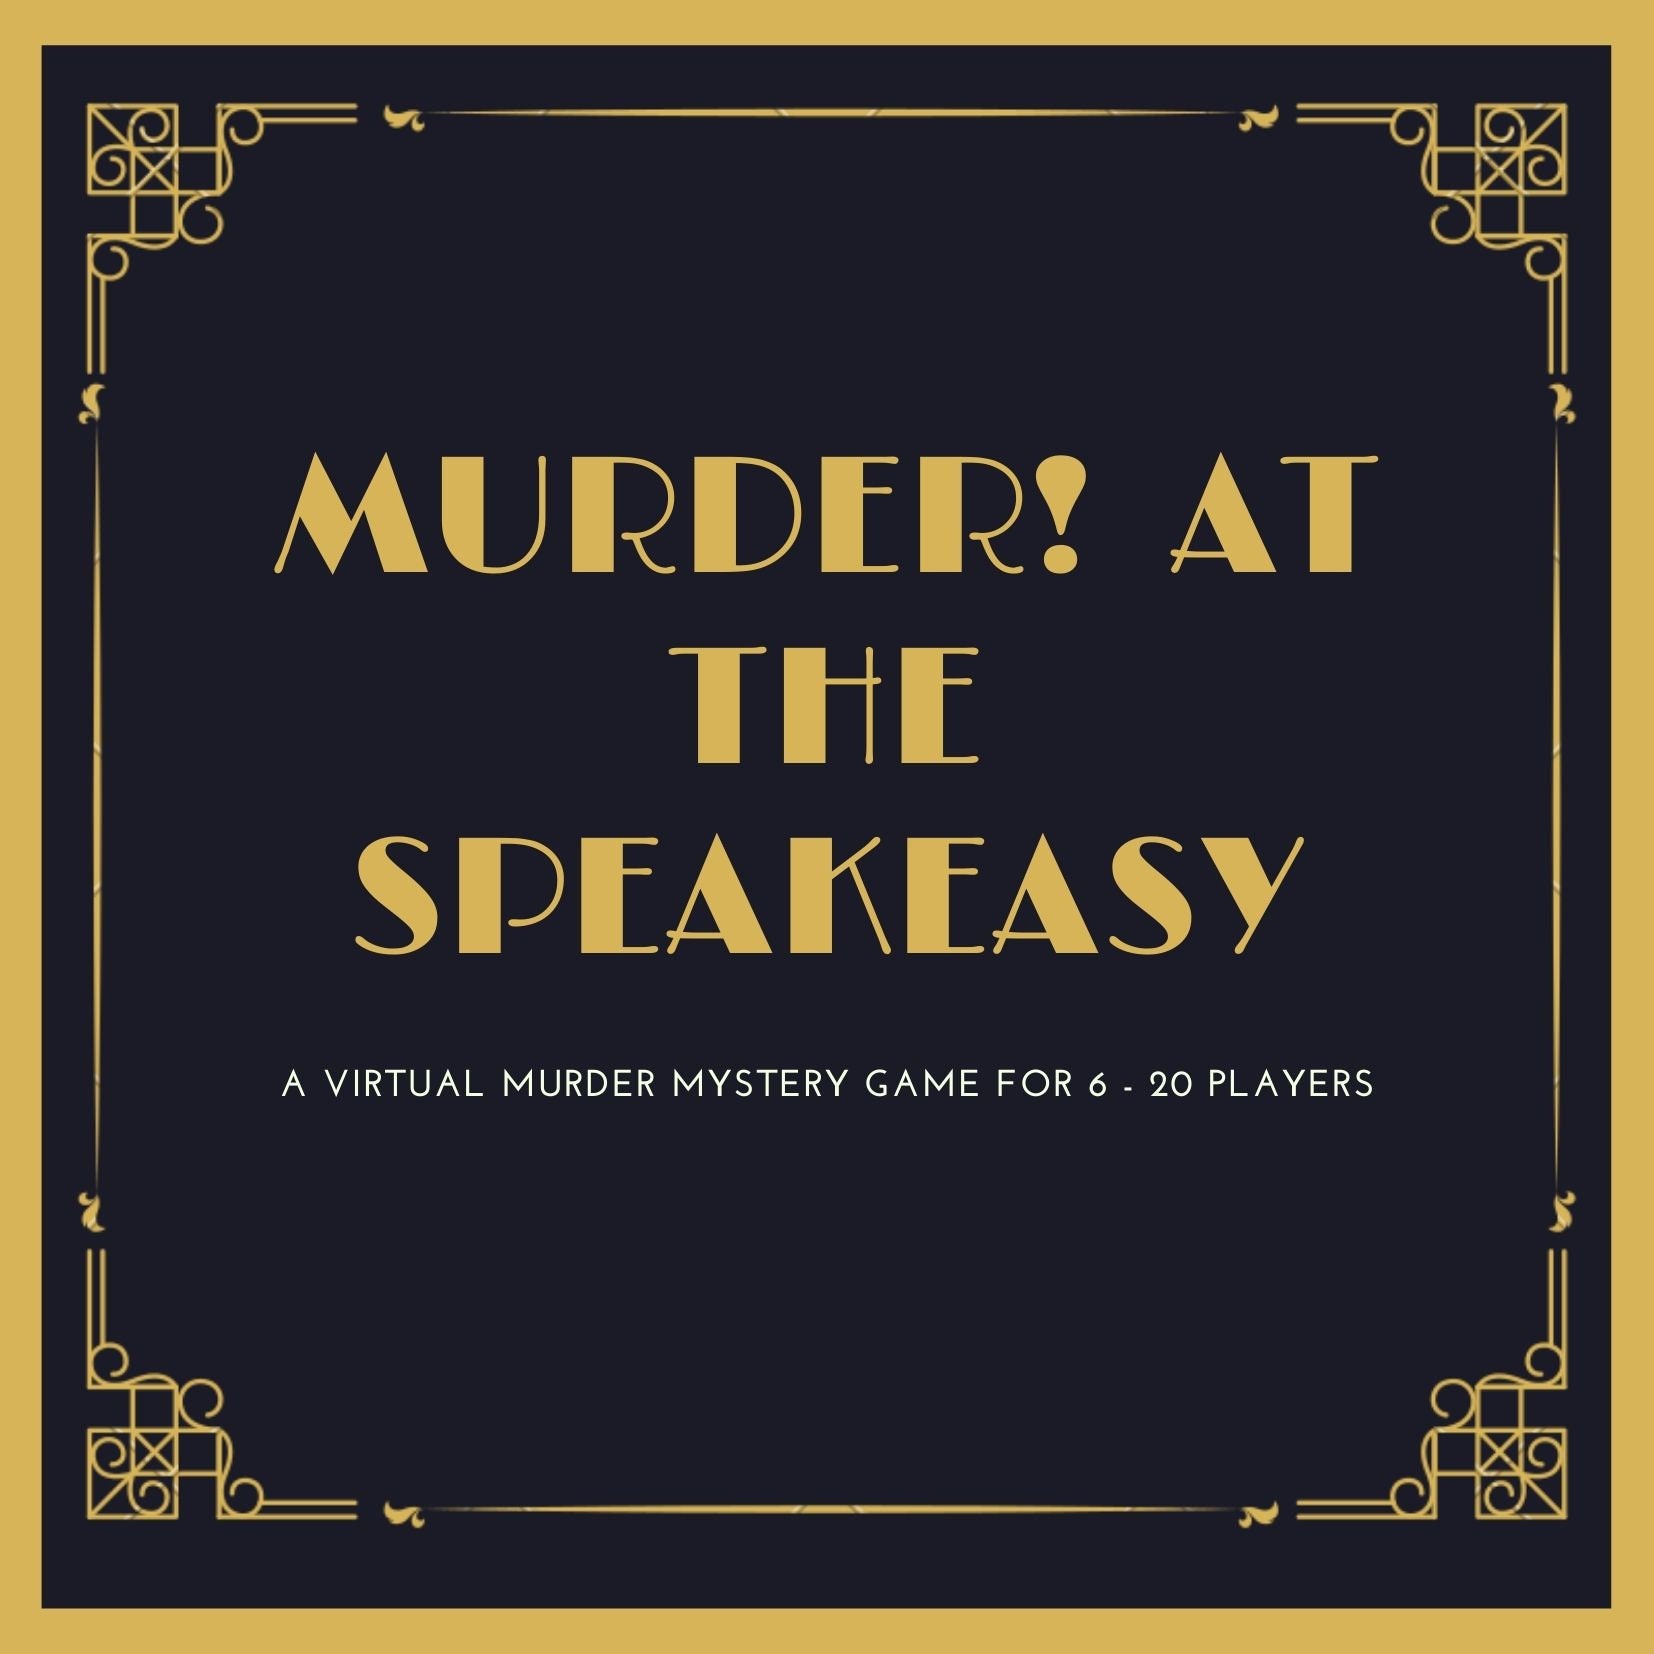 Murder At The Speakeasy A Virtual Murder Mystery Game For 6 Players